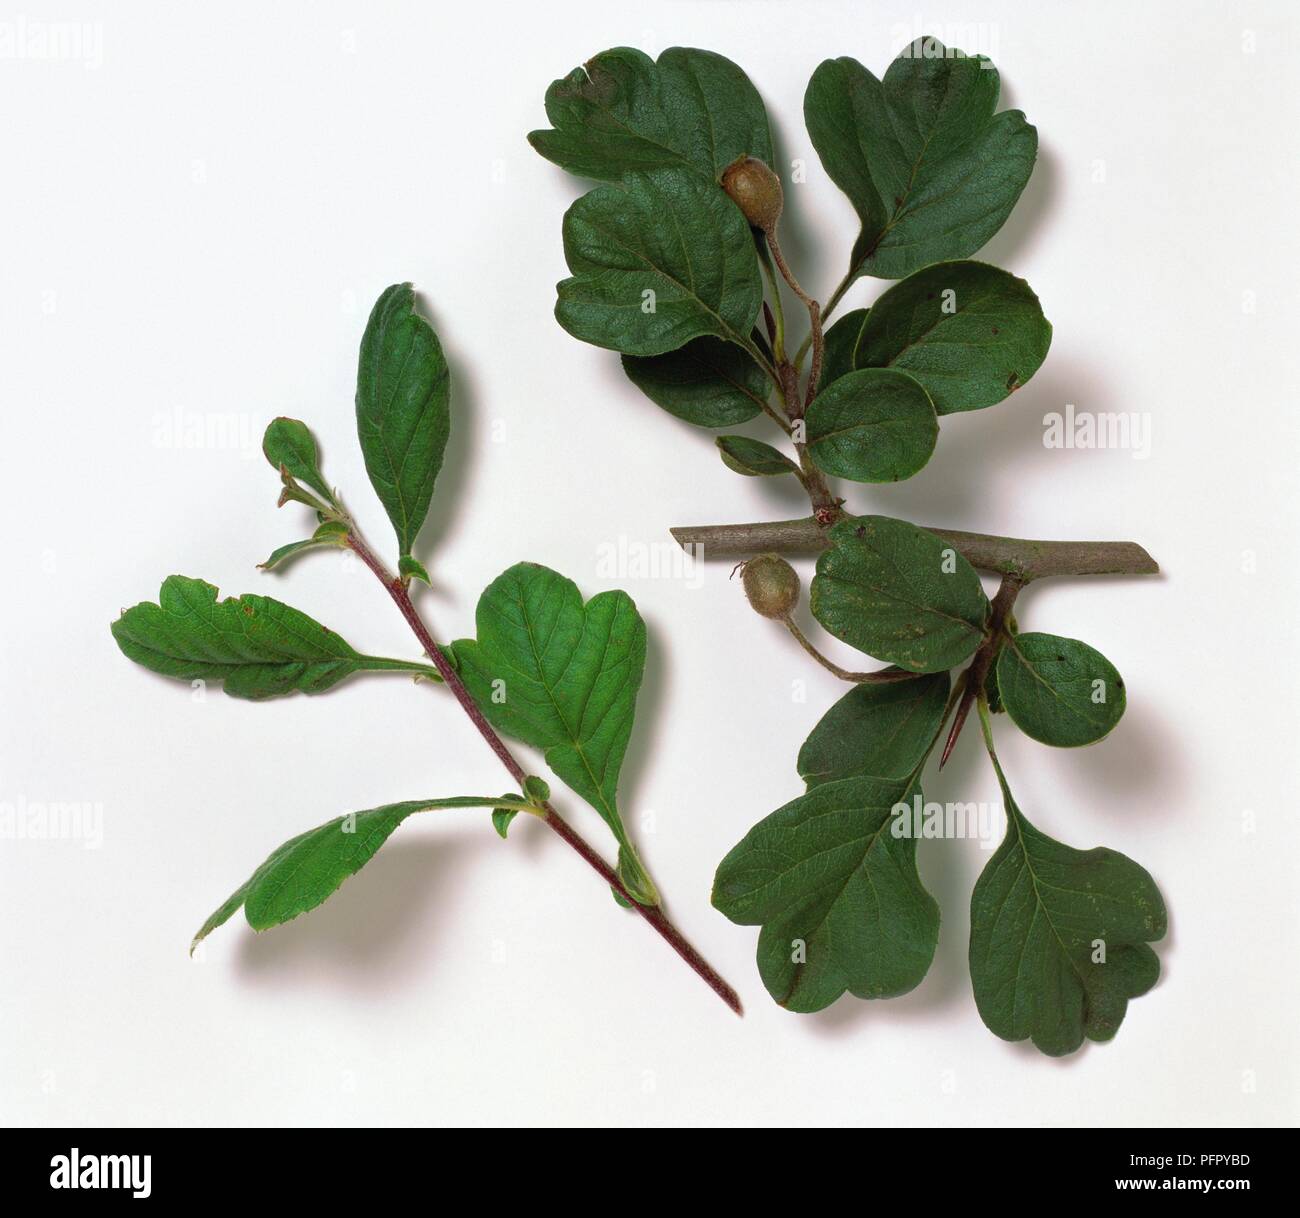 x Crataegomespilus Dardarii 'Jules D'Asnieres' stem with leaves and green fruit Stock Photo